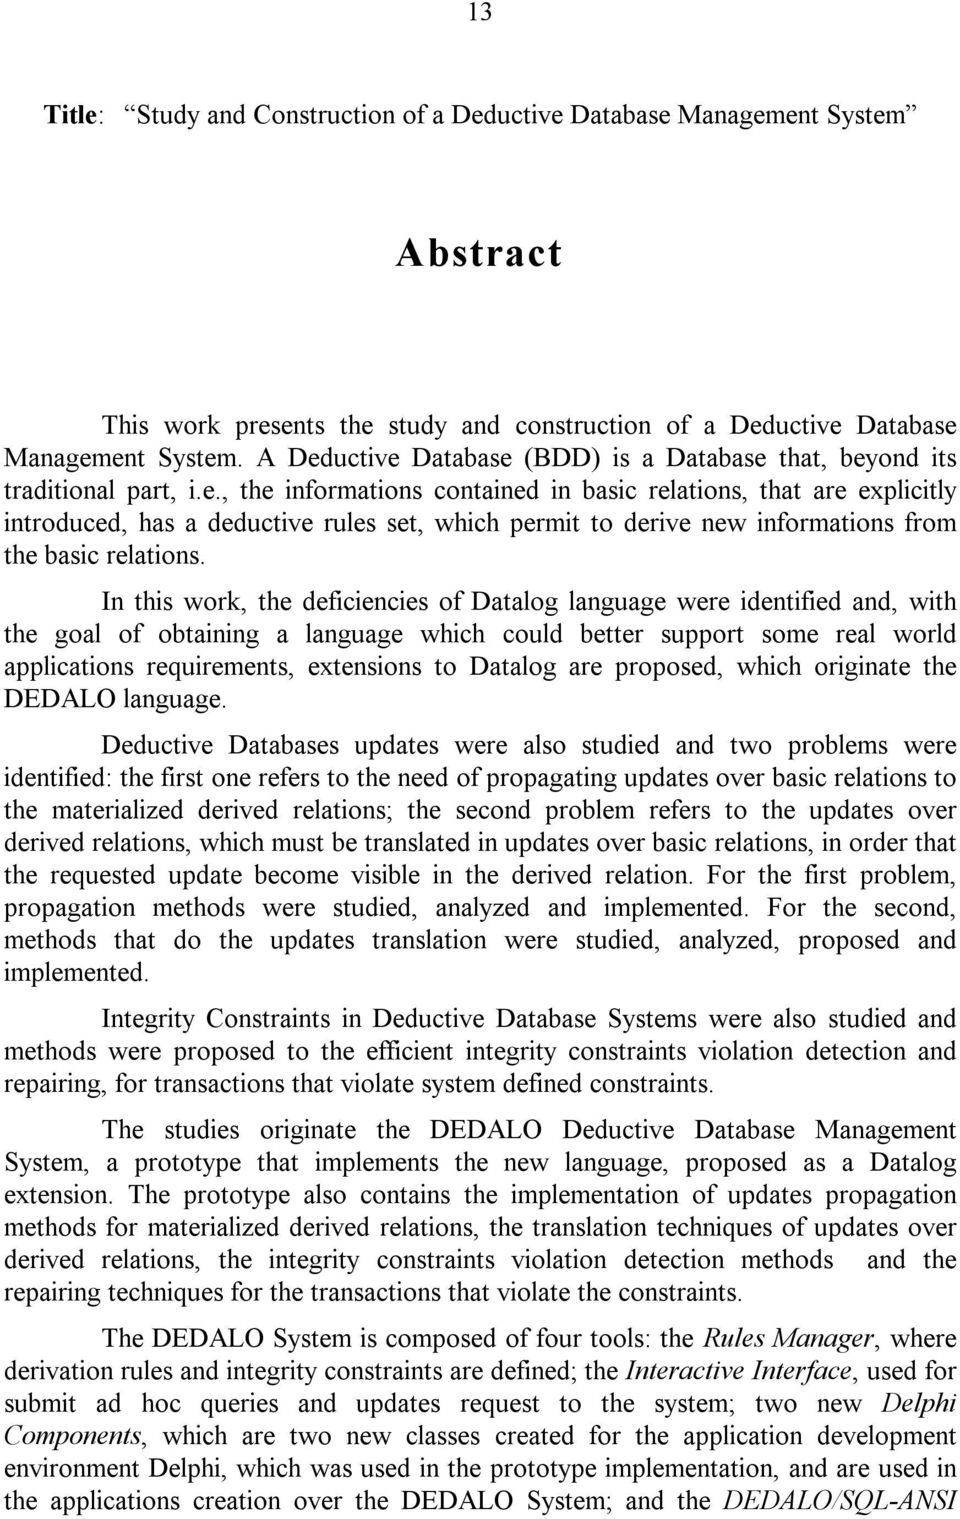 In this work, the deficiencies of Datalog language were identified and, with the goal of obtaining a language which could better support some real world applications requirements, extensions to